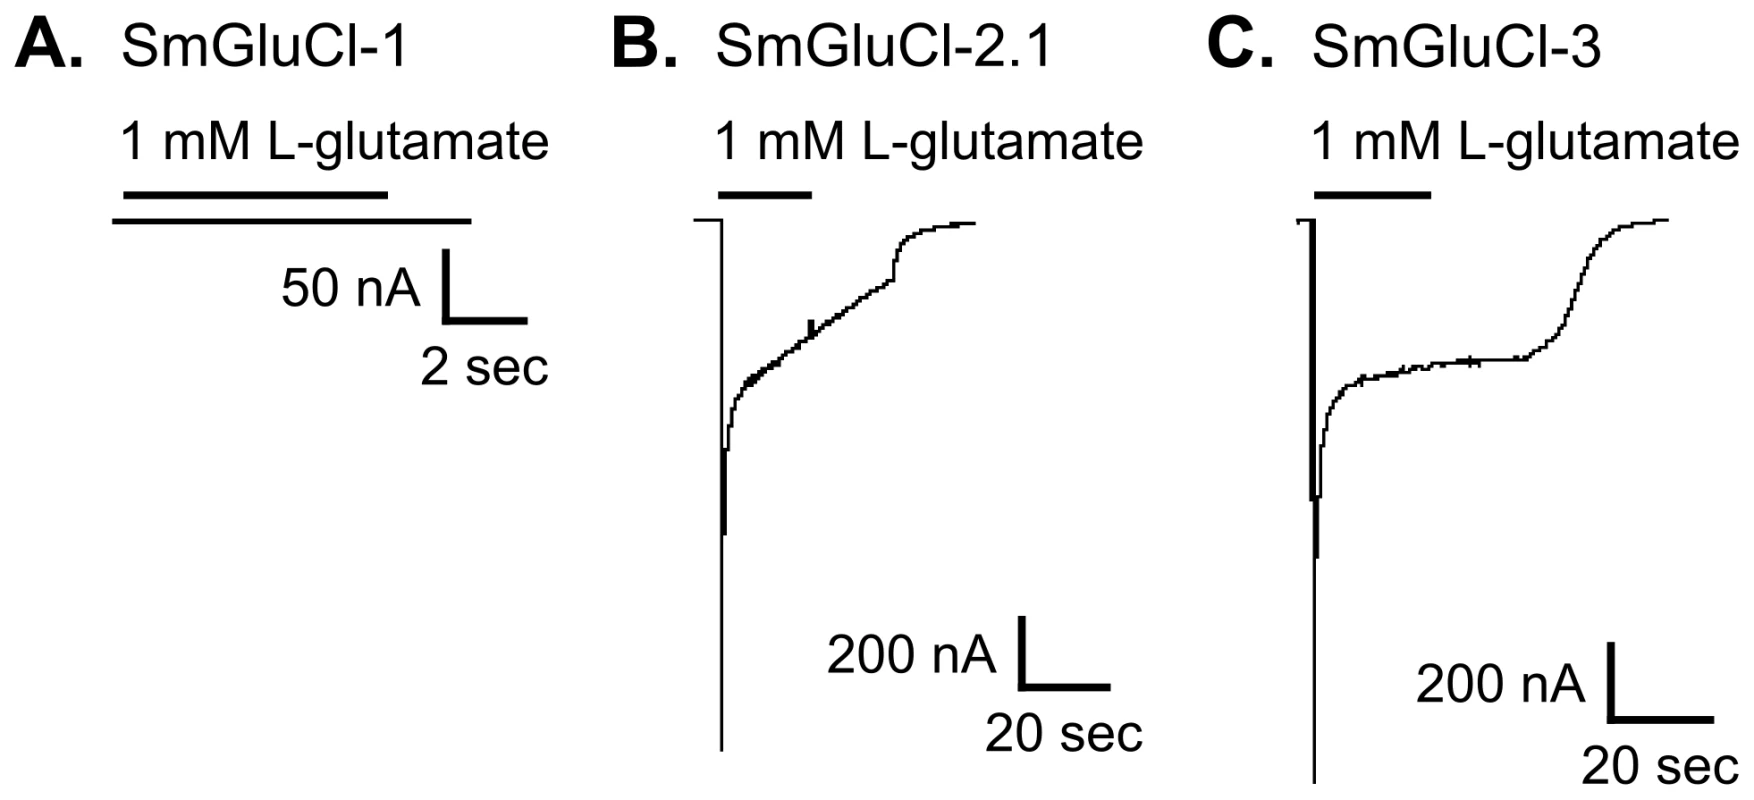 Functional expression of SmGluCl-1, SmGluCl-2, and SmGluCl-3 homo-oligomers in <i>Xenopus</i> oocytes.